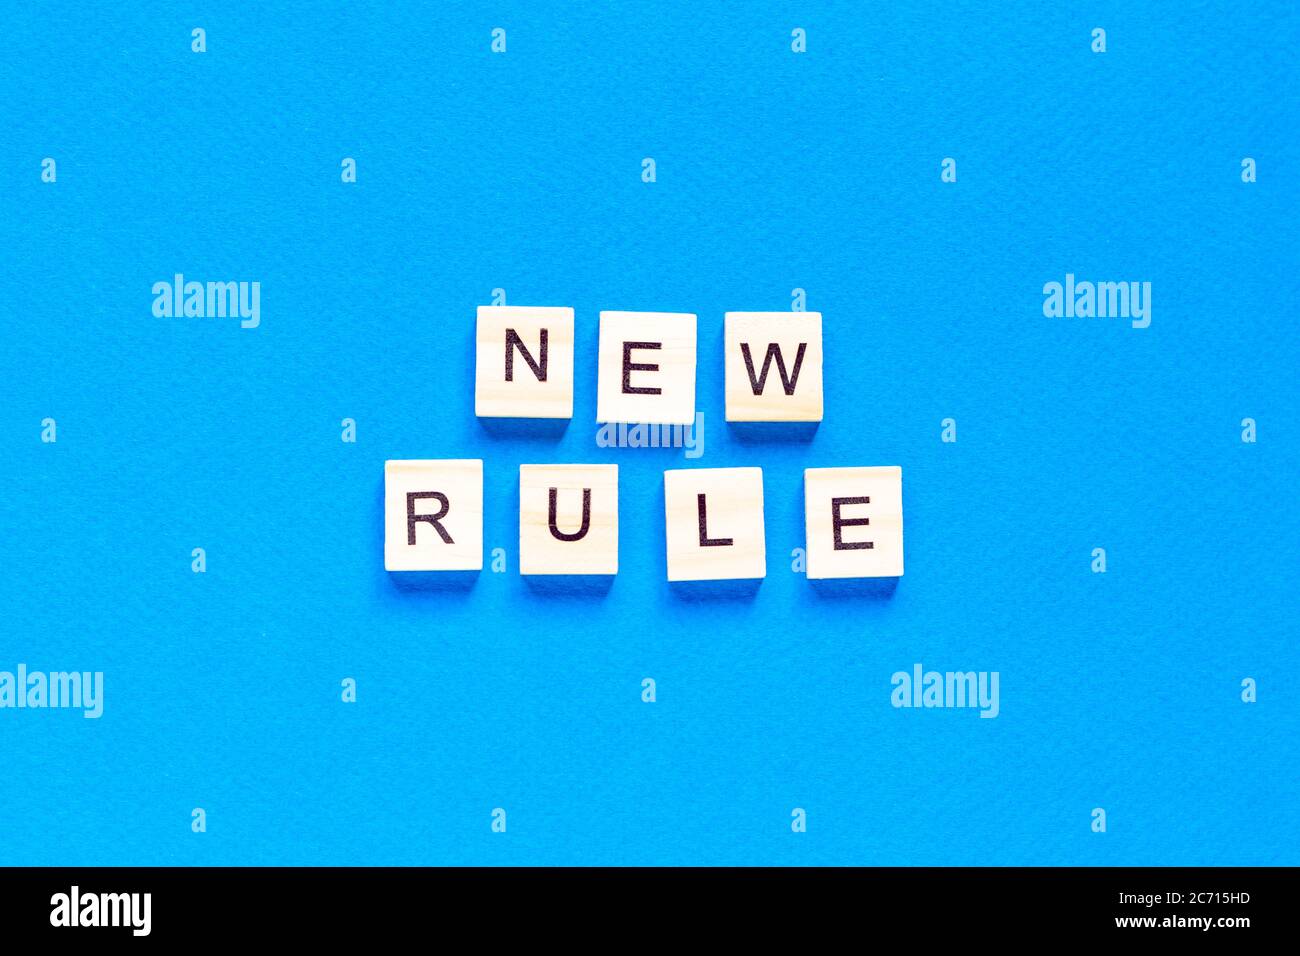 The NEW RULE is written in wooden letters on a blue background. New concept. Business, law, rules, update. tflat layout. op view. Stock Photo